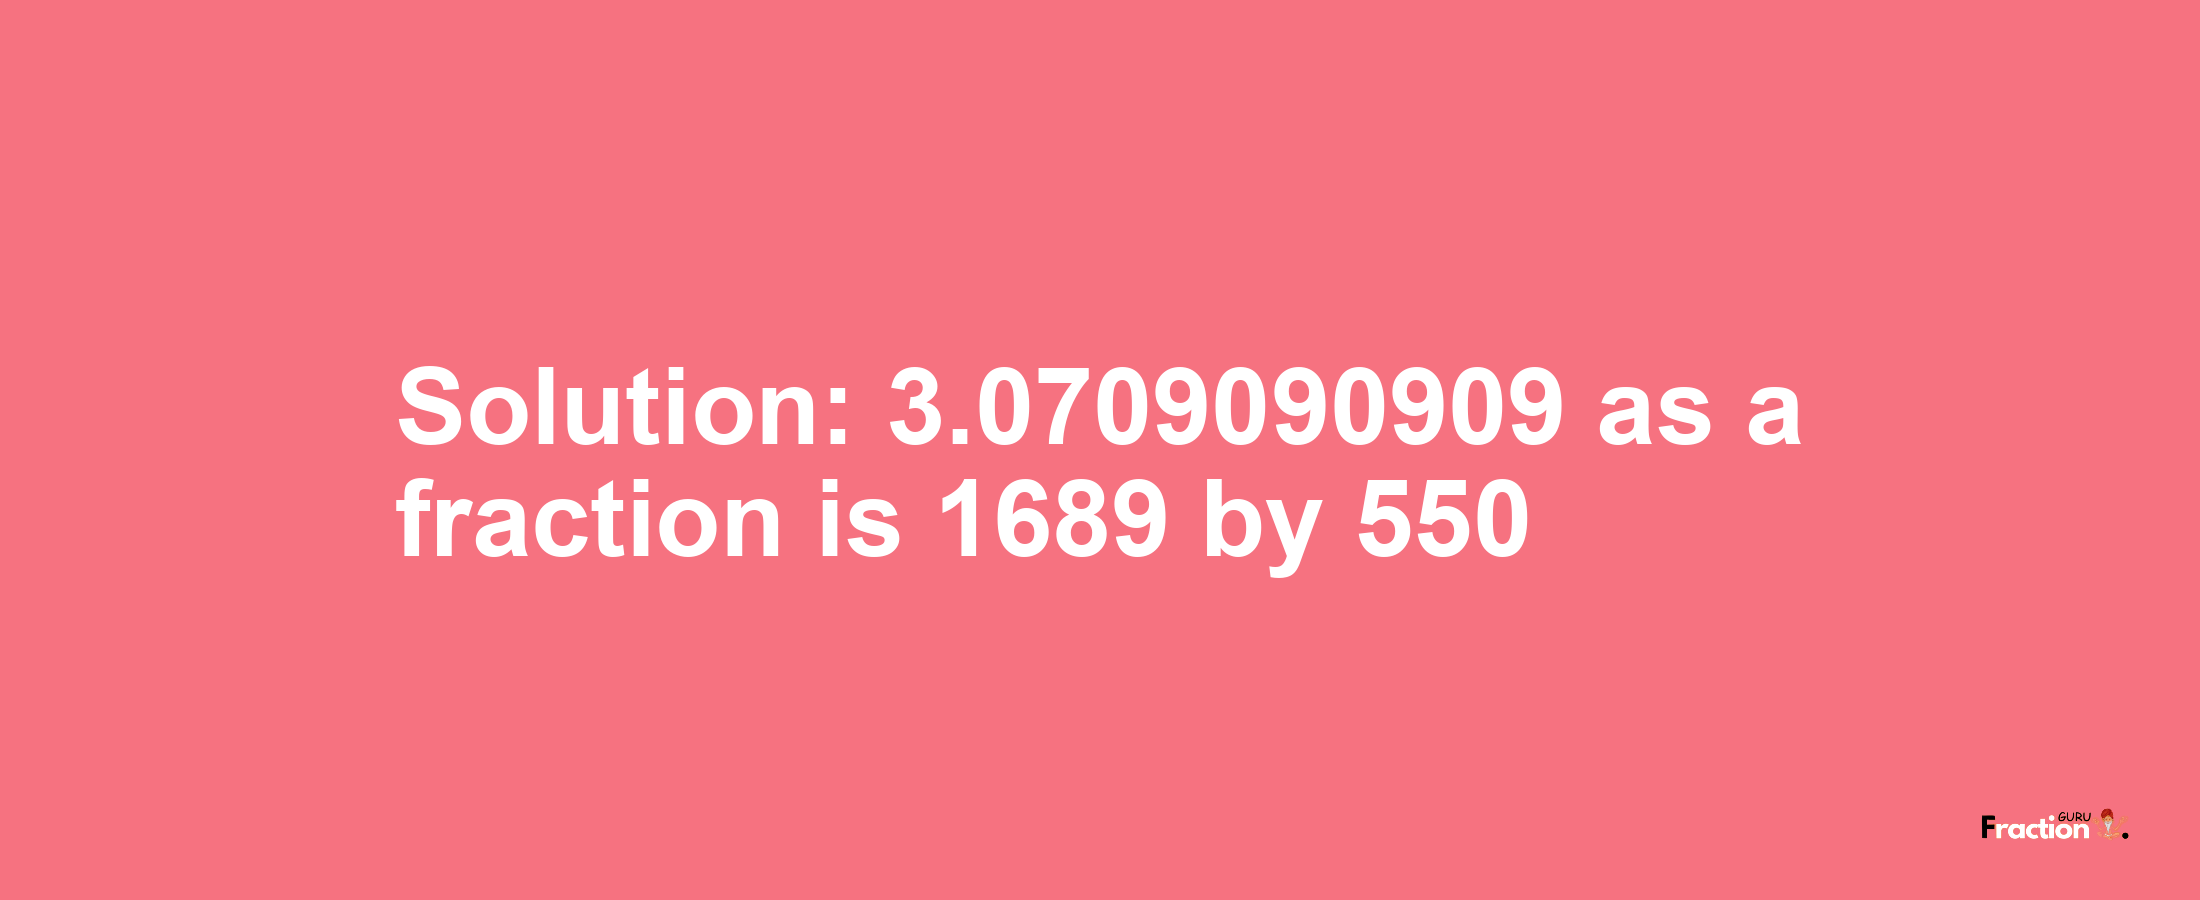 Solution:3.0709090909 as a fraction is 1689/550